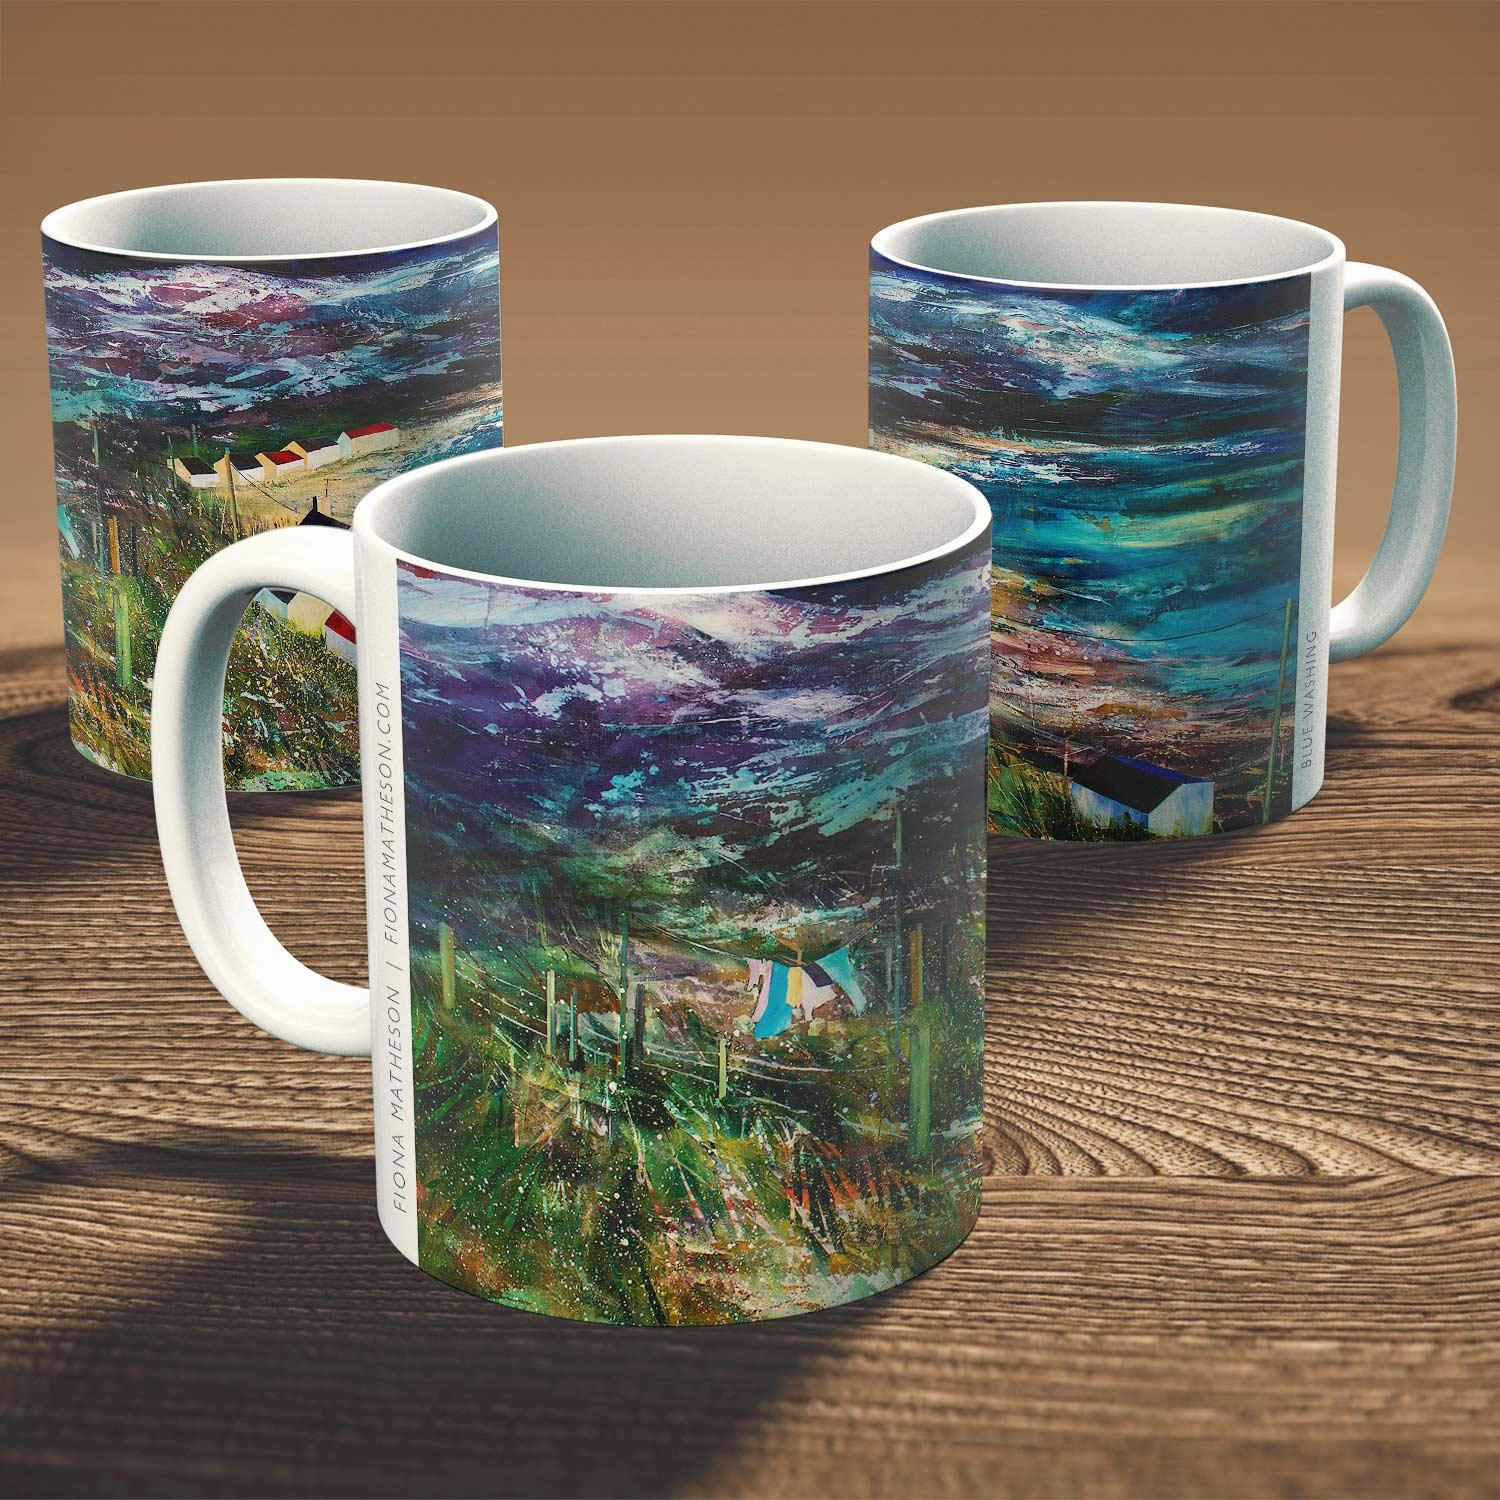 Blue Washing Mug from an original painting by artist Fiona Matheson